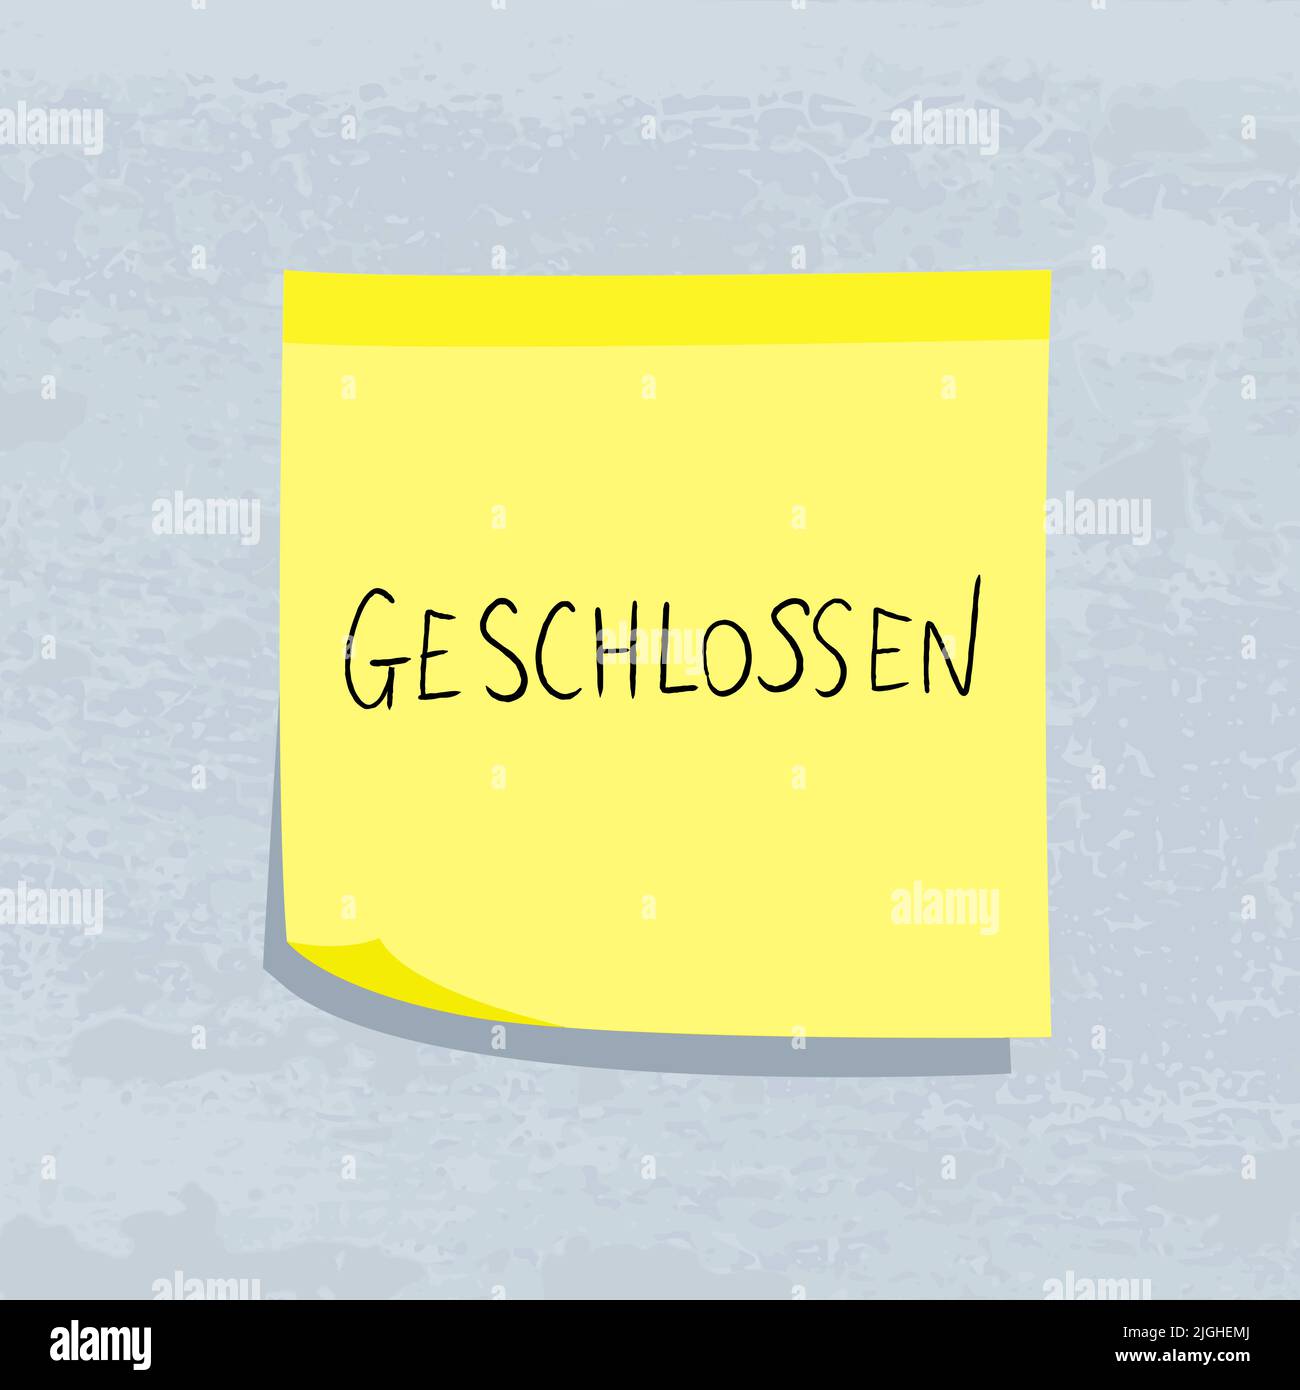 Geschlossen means closed in German language. Yellow sticky note message. Paper sign. Stock Vector